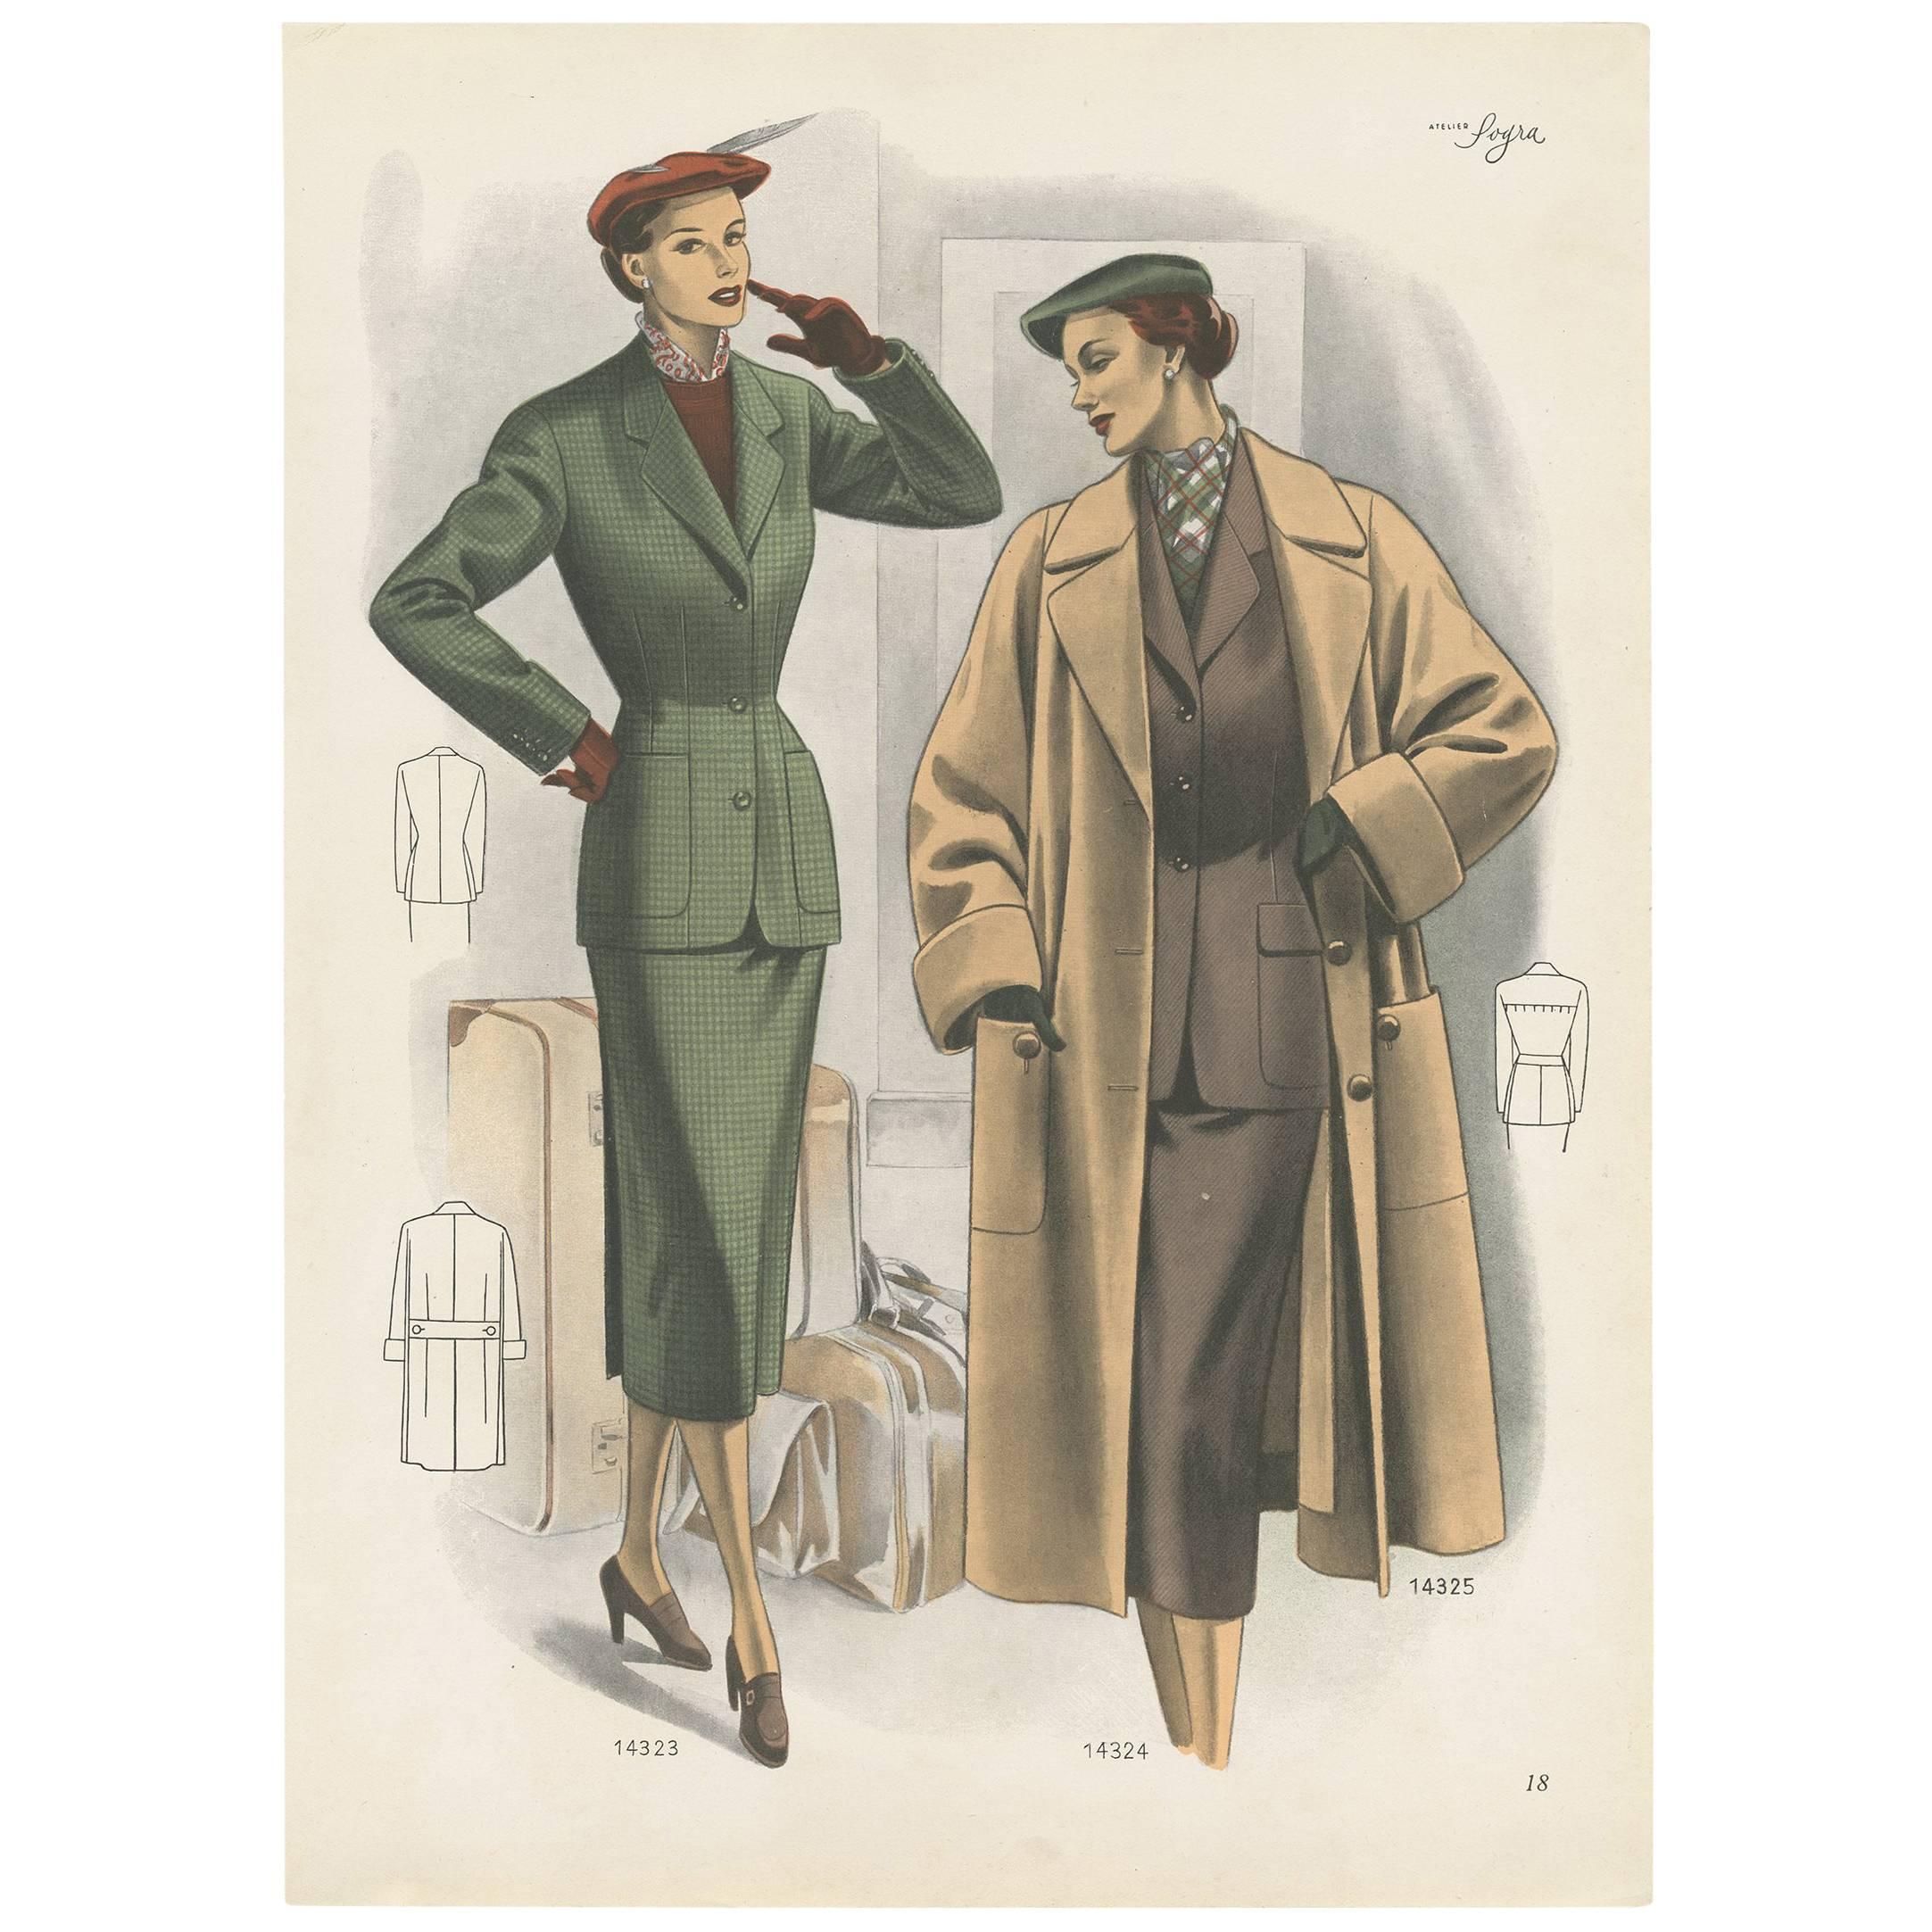 Vintage Fashion Print 'Pl. 14323' Published in Ladies Styles, 1952 For Sale